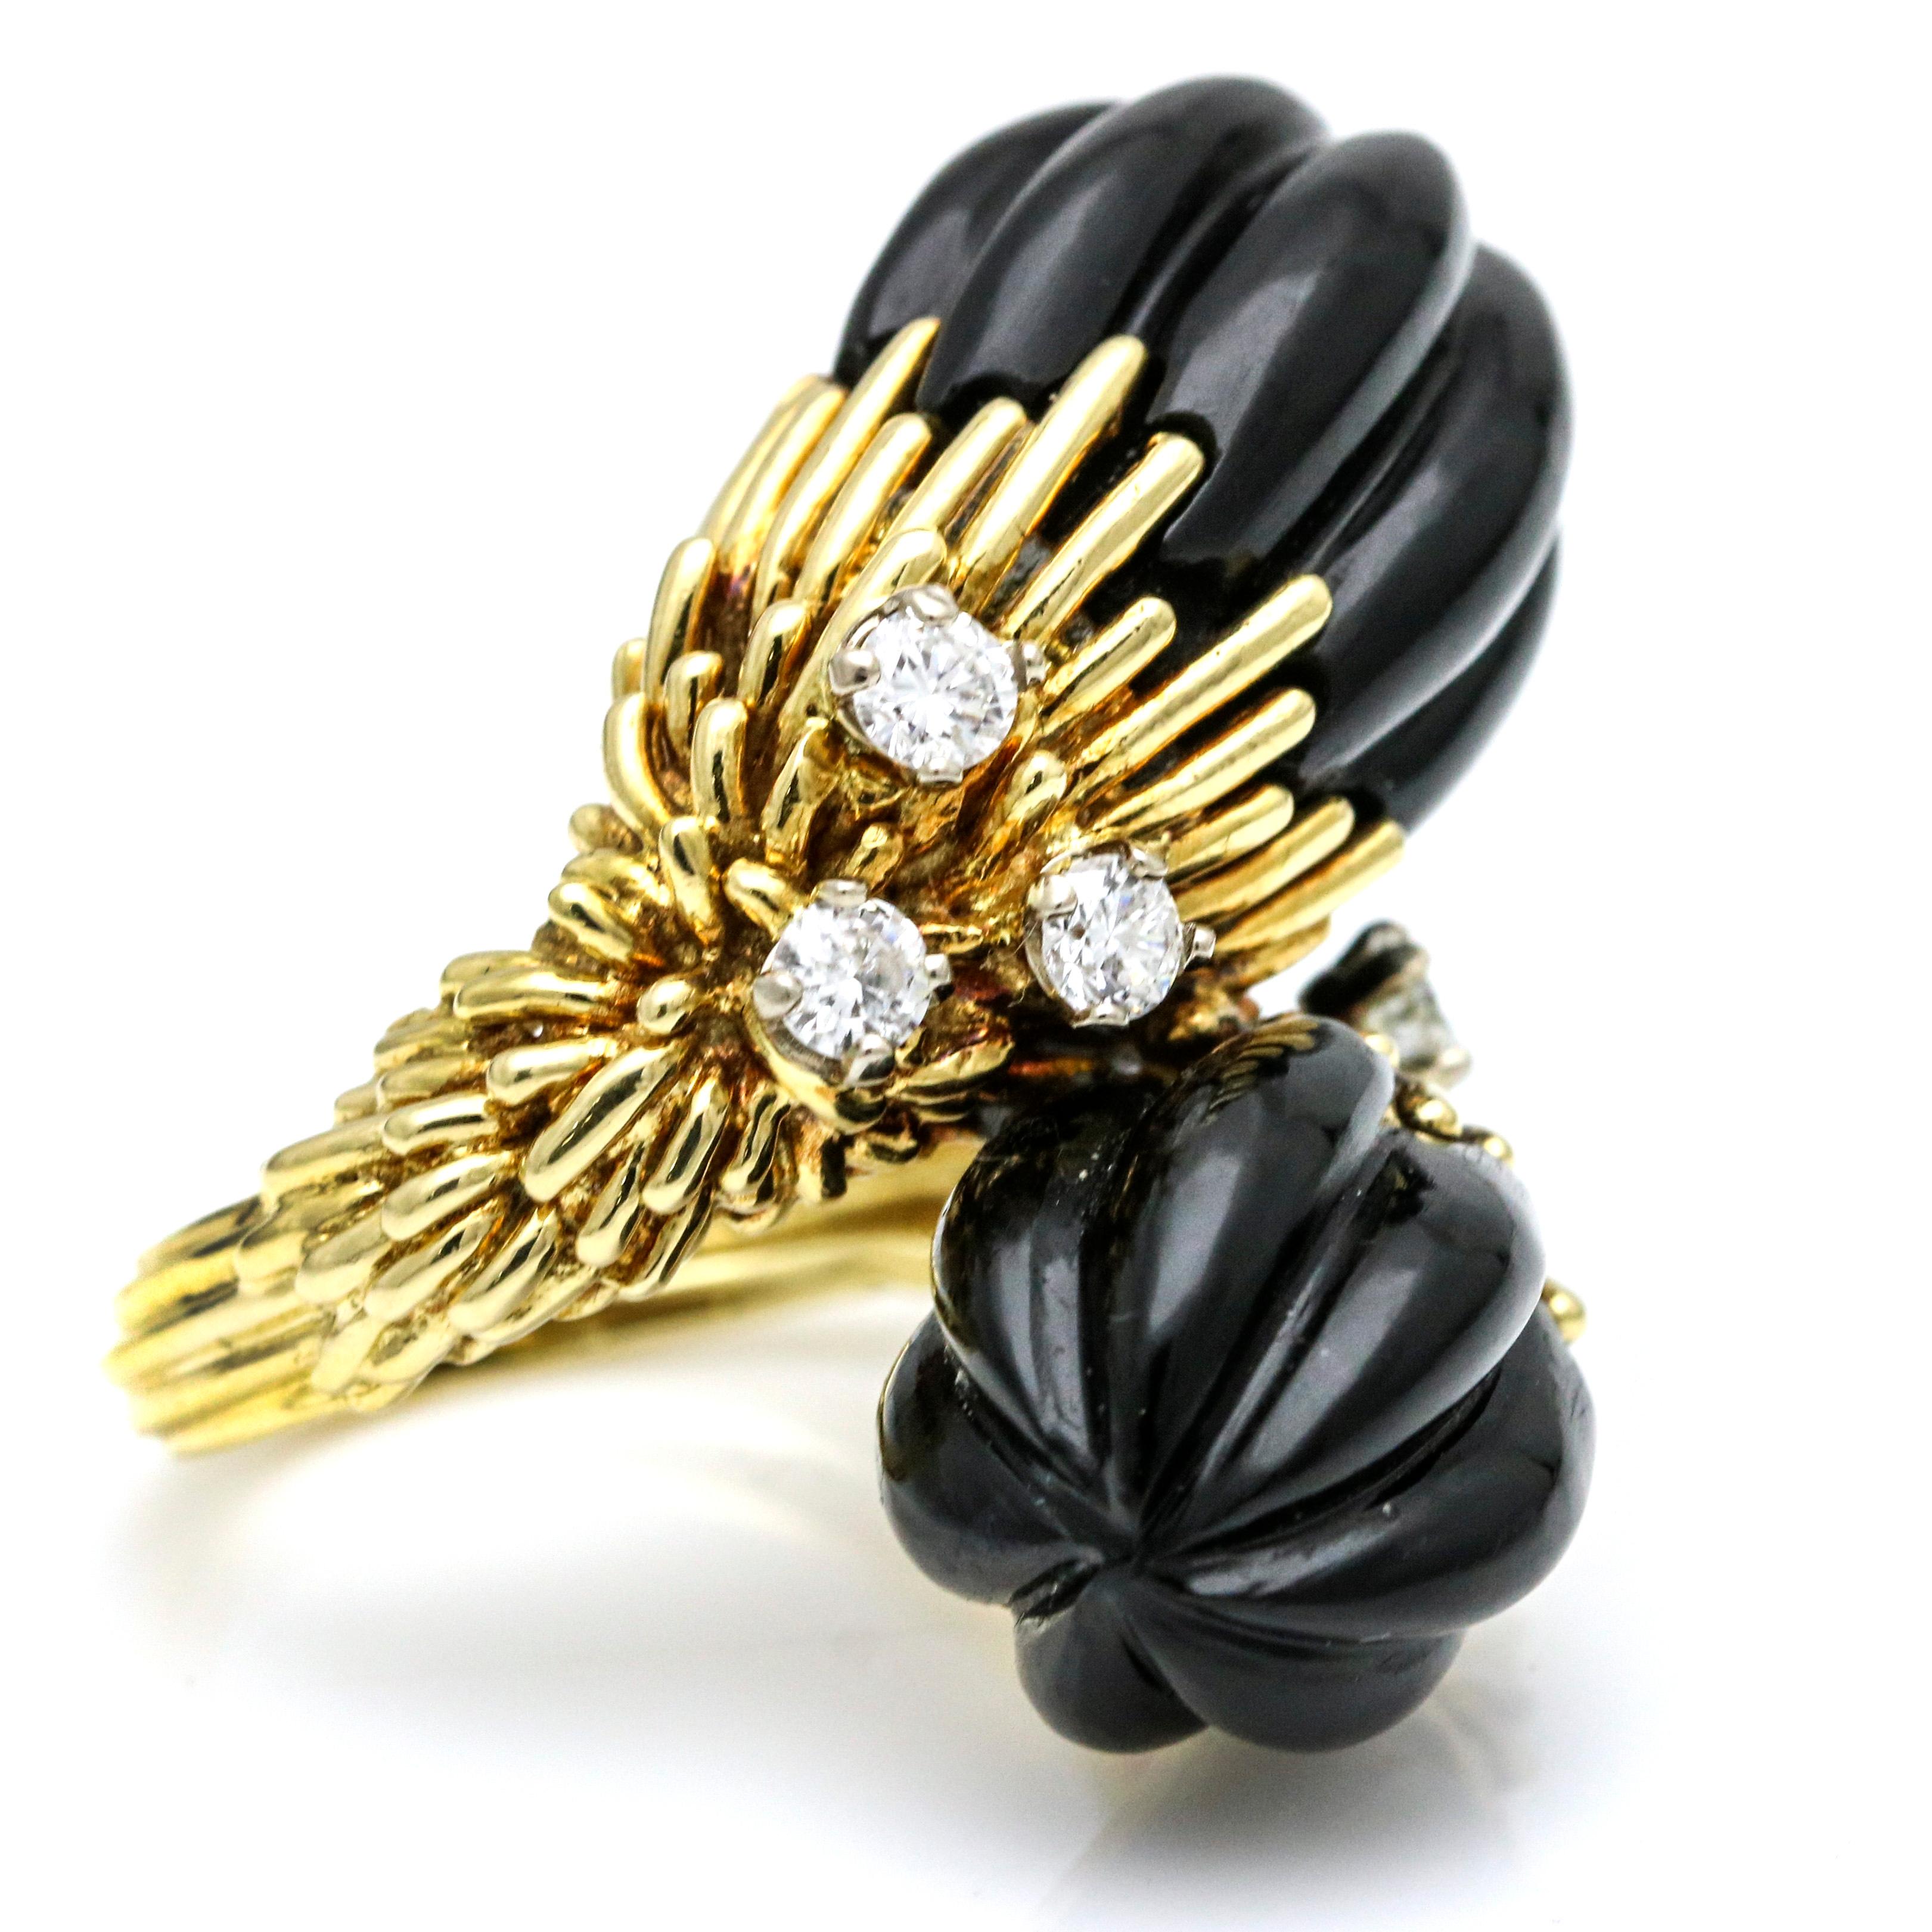 1970s Kutchinsky bypass ring in 18 karat yellow gold with carved onyx and diamonds. Size 6. The ring is prong set with 6 round diamonds. Weight, 18.6 grams. Height from finger, 21mm. Length, 32.5mm. Circa 1970s.
